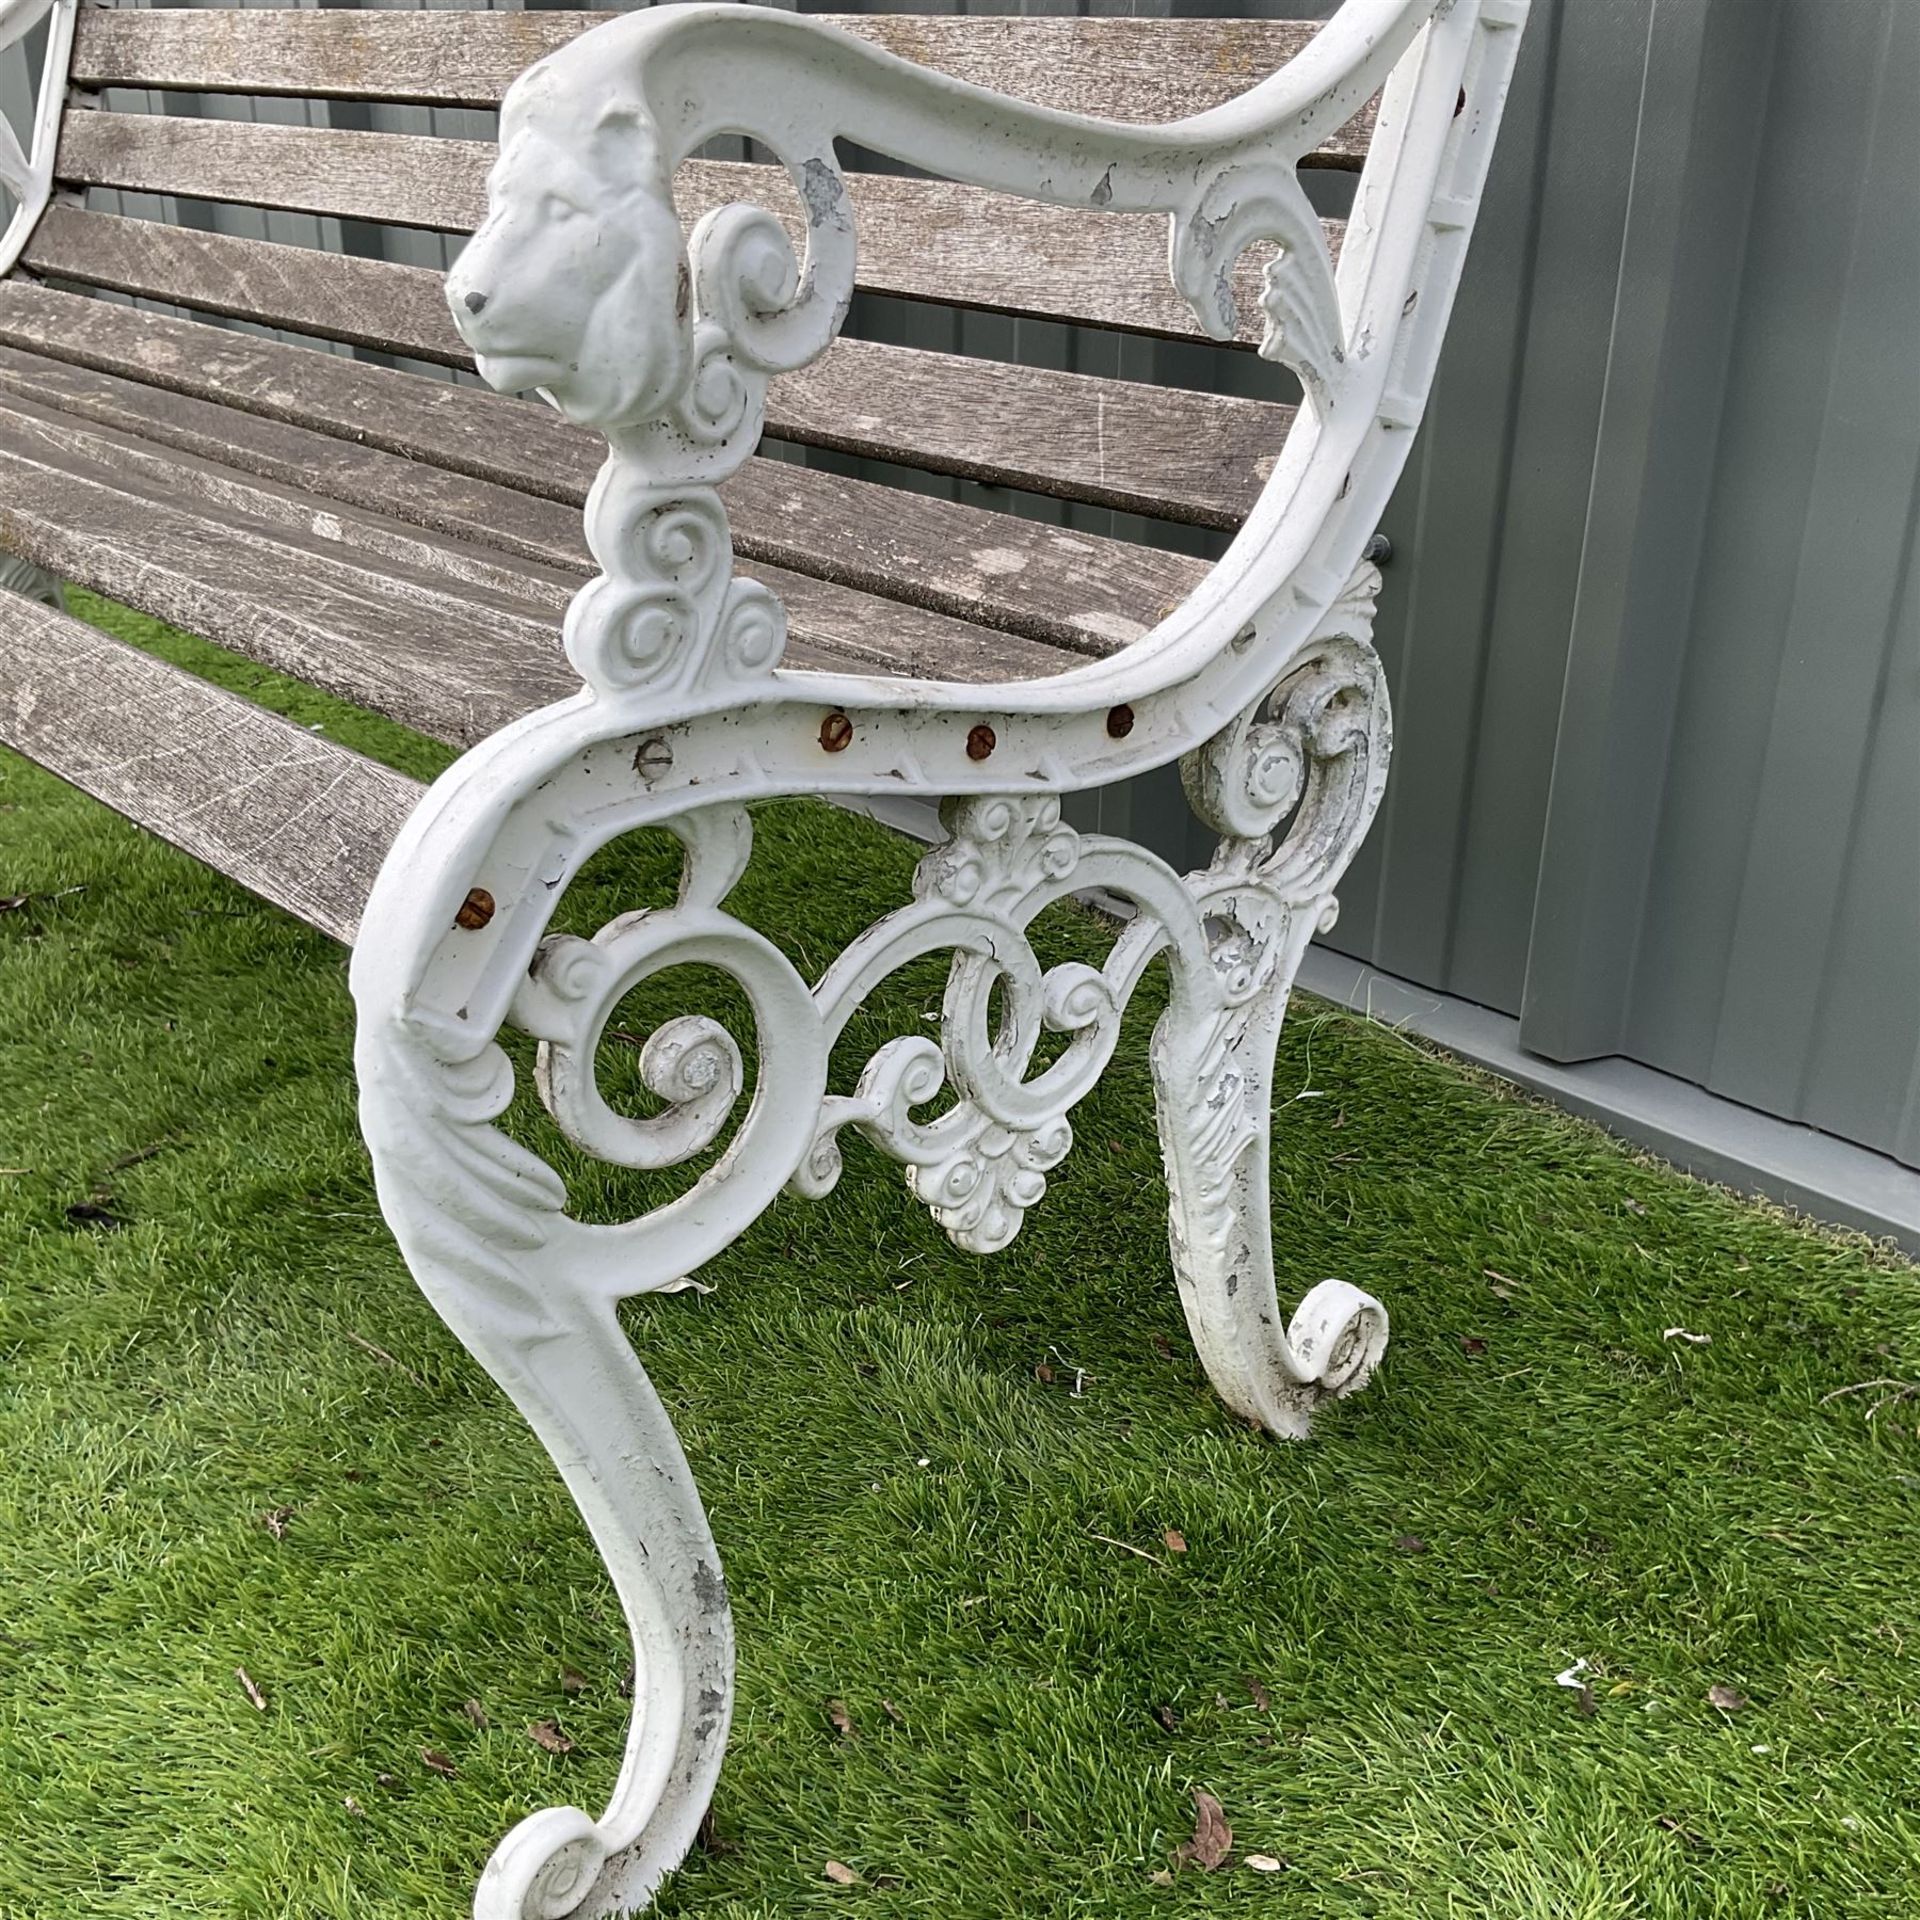 Cast aluminium and wood slatted garden bench painted in white - THIS LOT IS TO BE COLLECTED BY APPO - Image 4 of 4